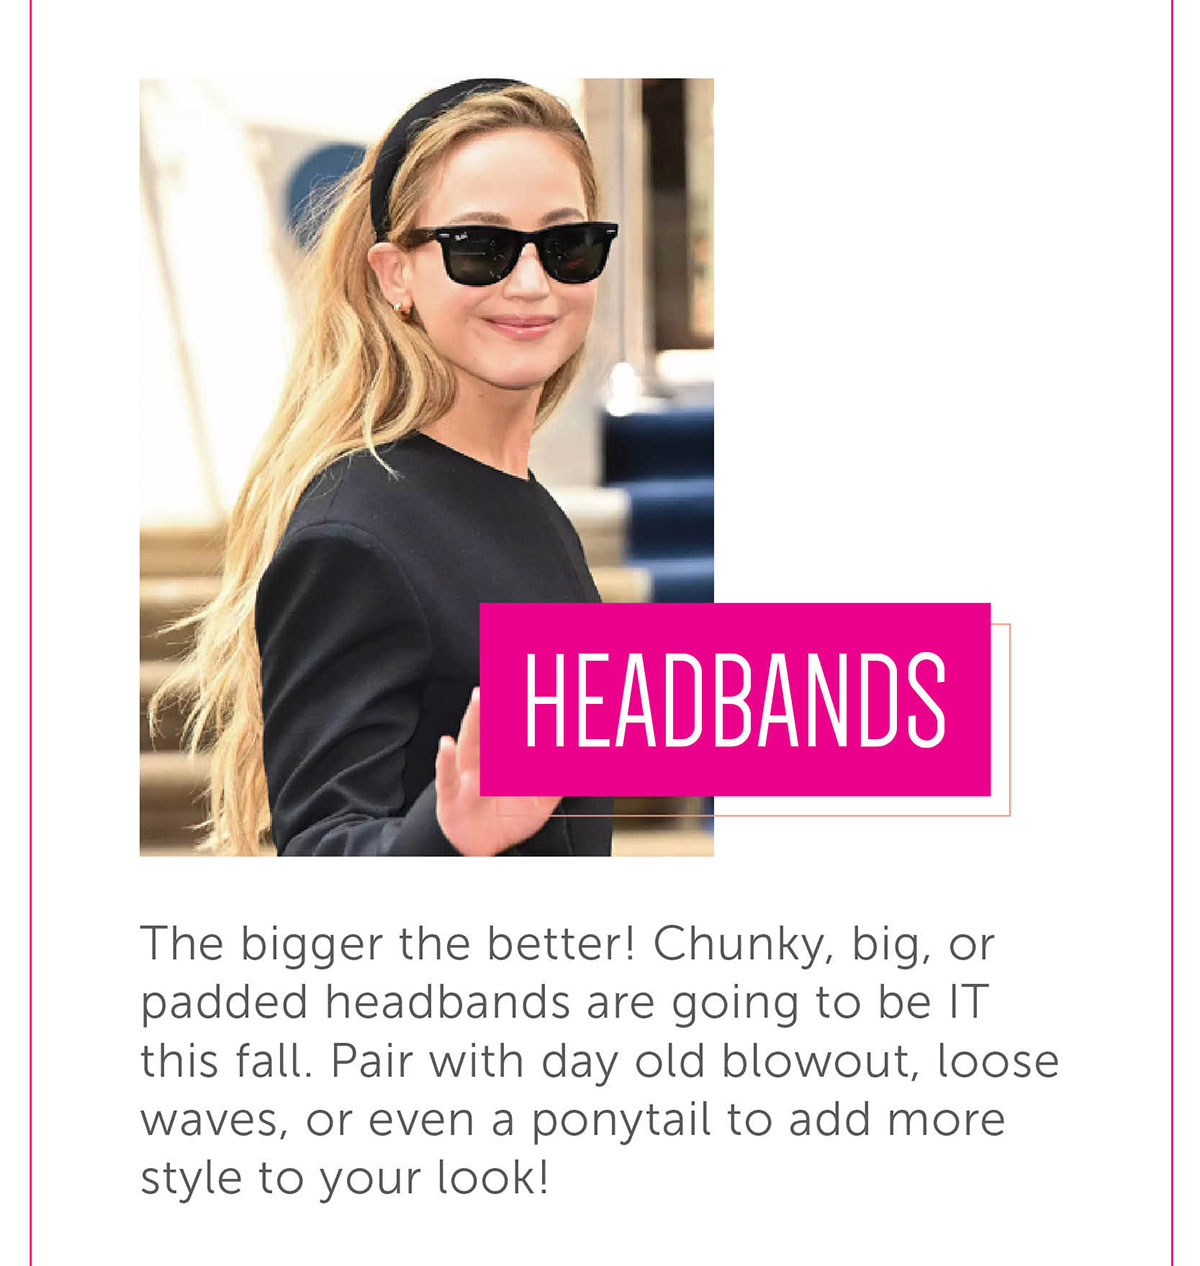 Headbands The bigger the better! Chunky, big, or padded headbands are going to be IT this fall. Pair with day old blowout, loose waves, or even a ponytail to add more style to your look!